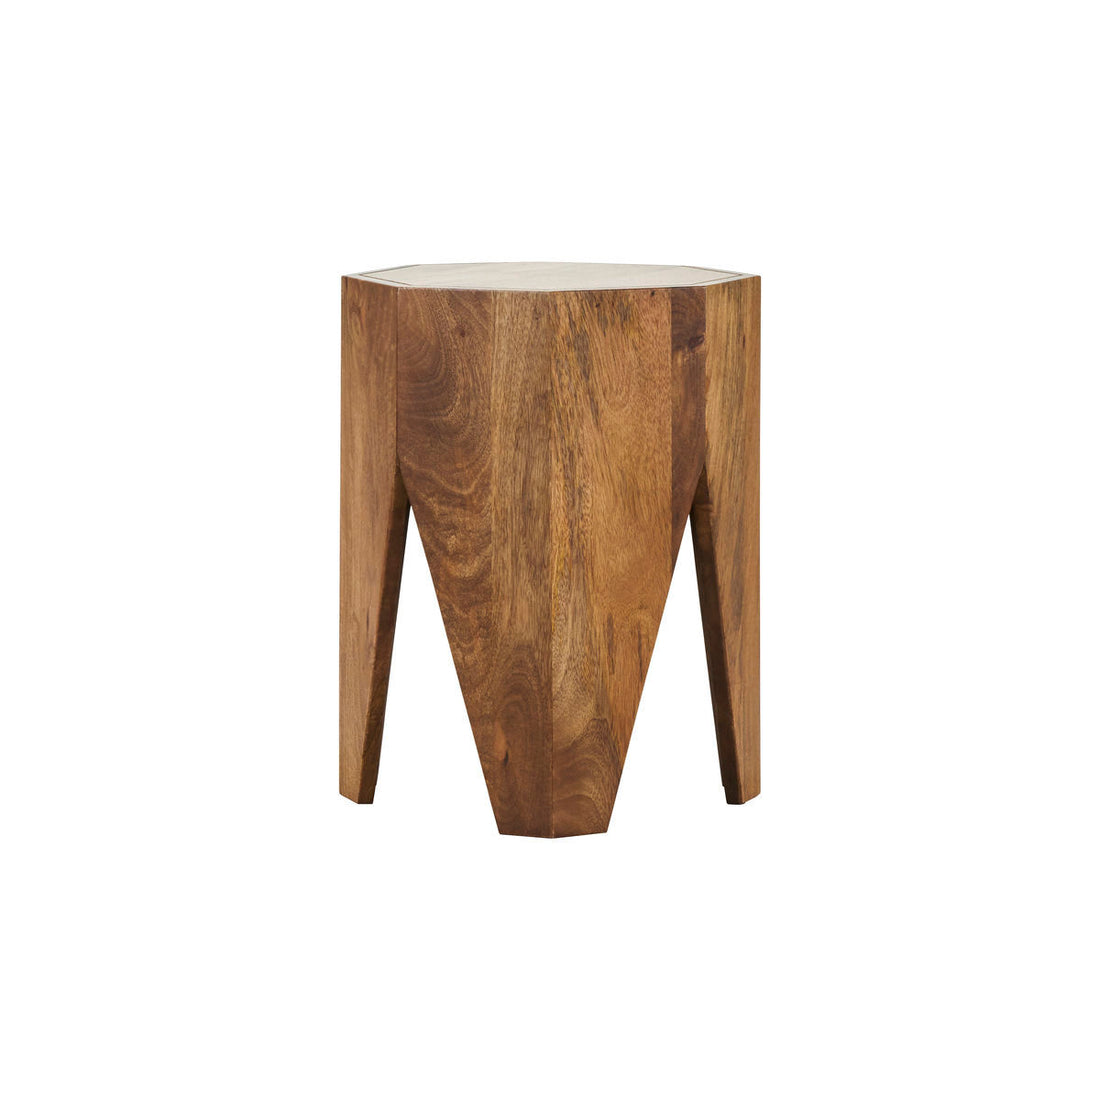 House Doctor Stool, Octa, Nature